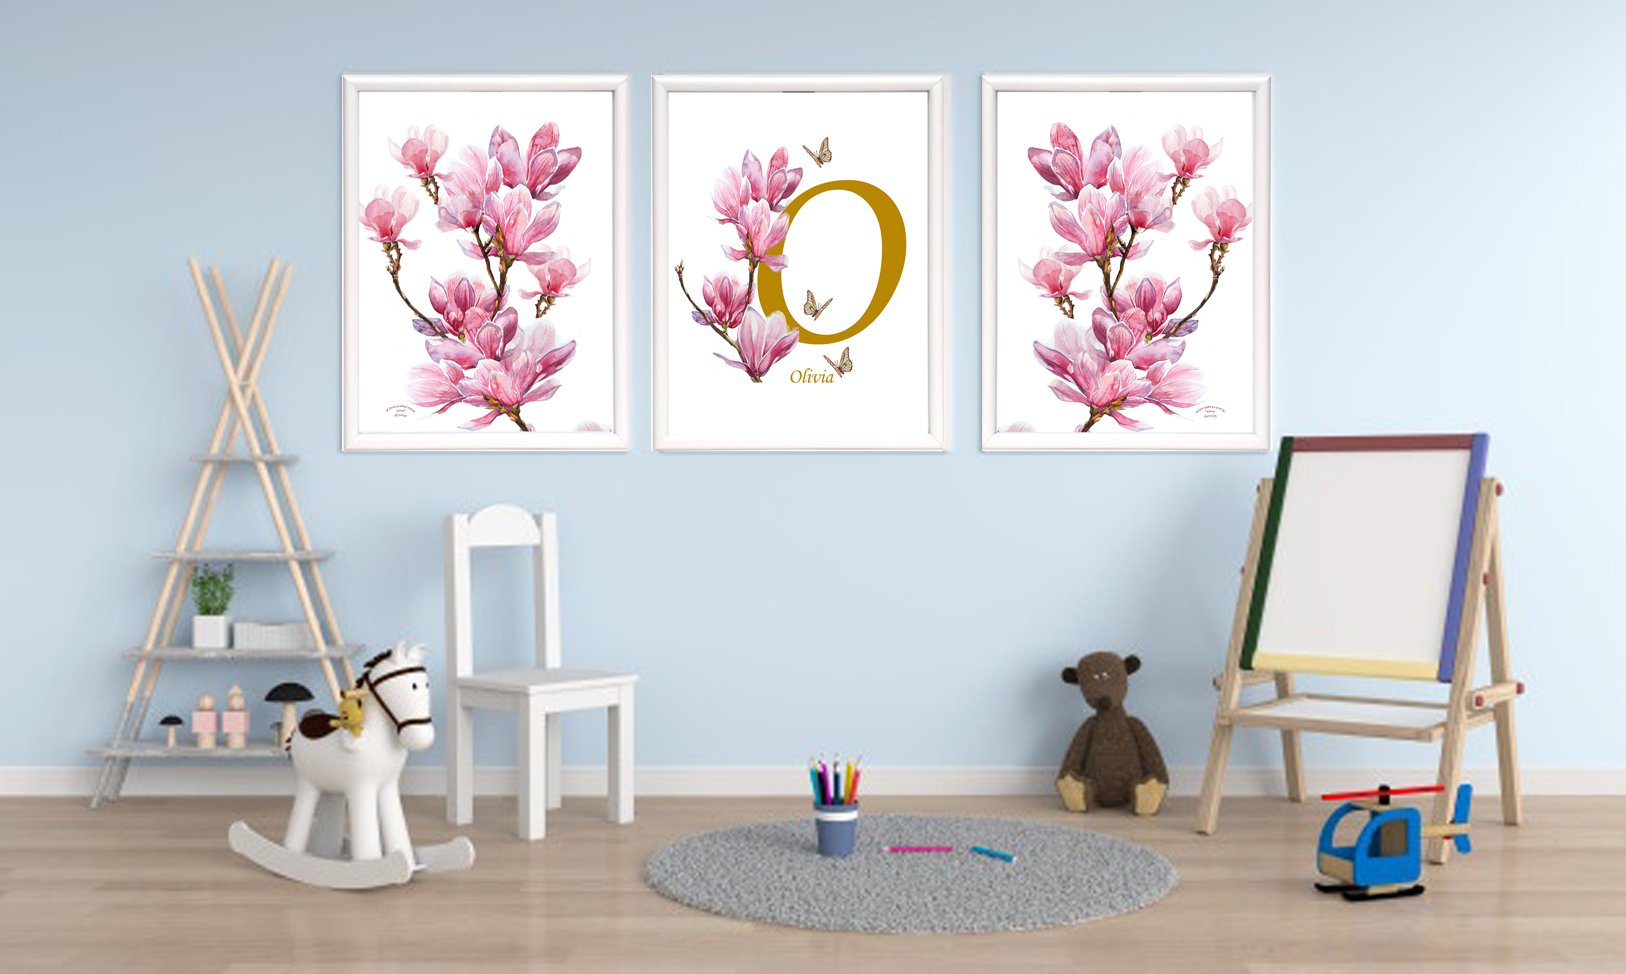 Chance to win Free set of 3 Digital Download prints with personilized Name Giveaway